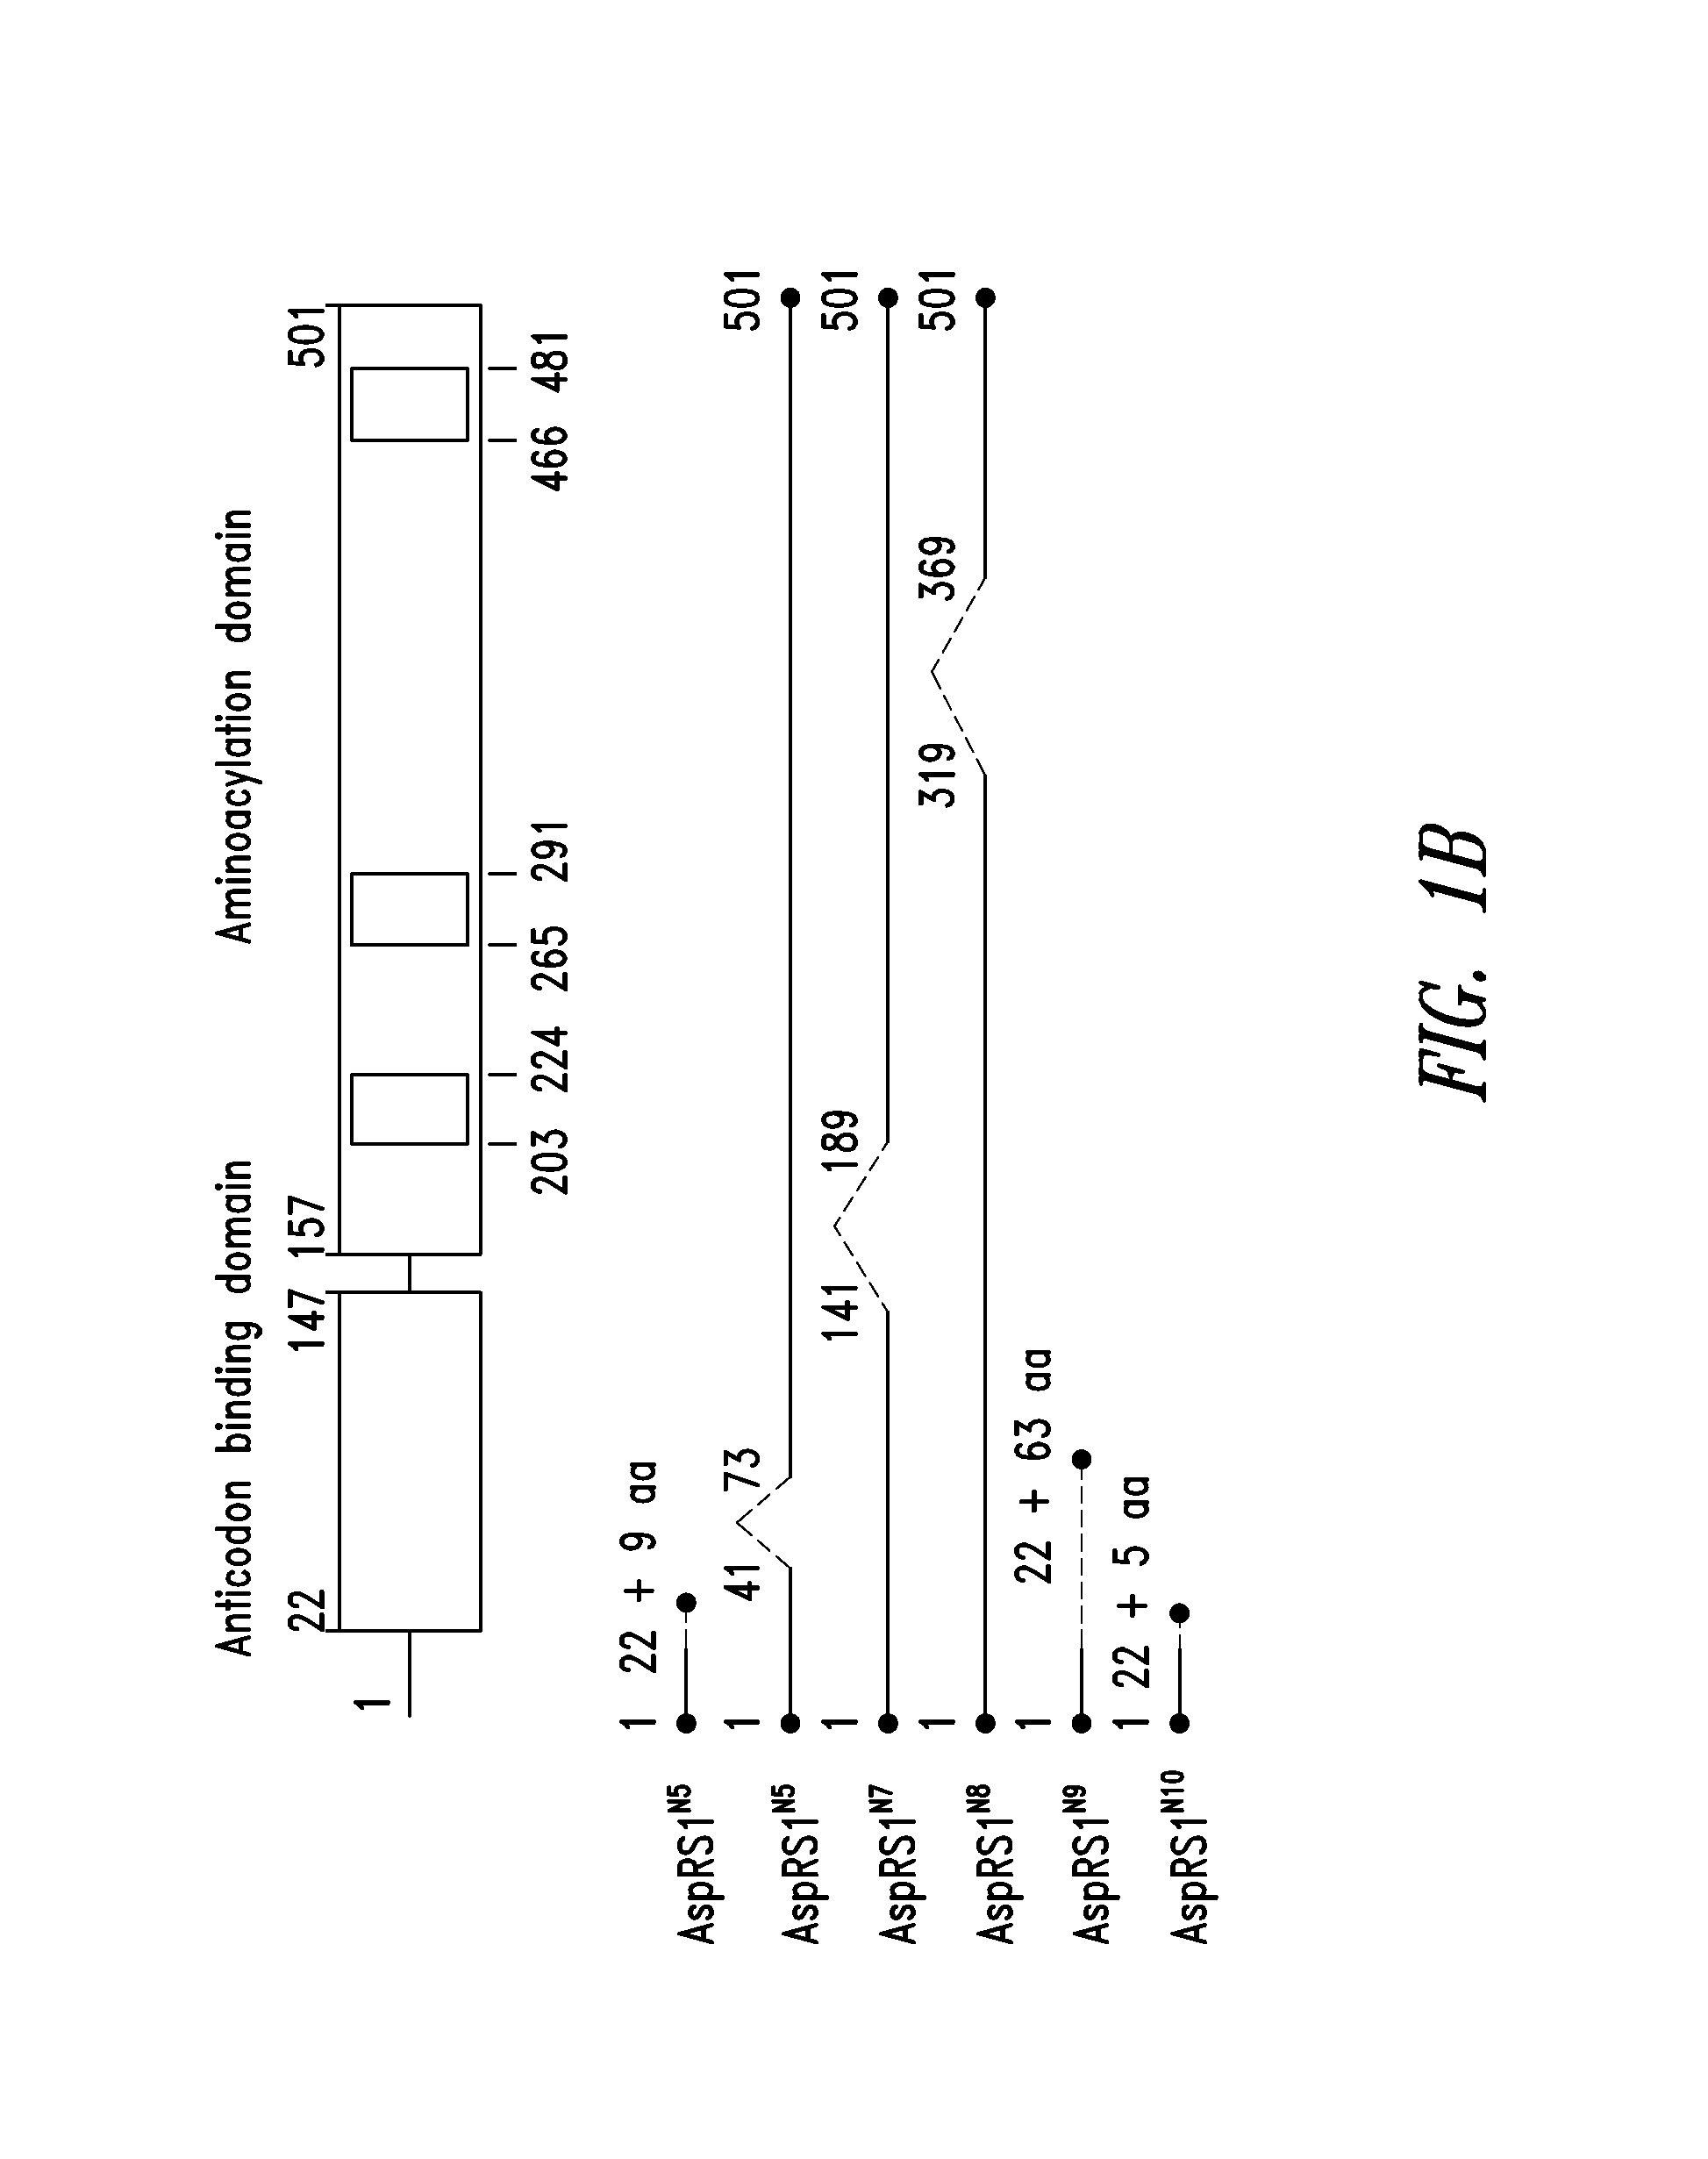 Innovative discovery of therapeutic, diagnostic, and antibody compositions related to protein fragments of aspartyl-trna synthetases